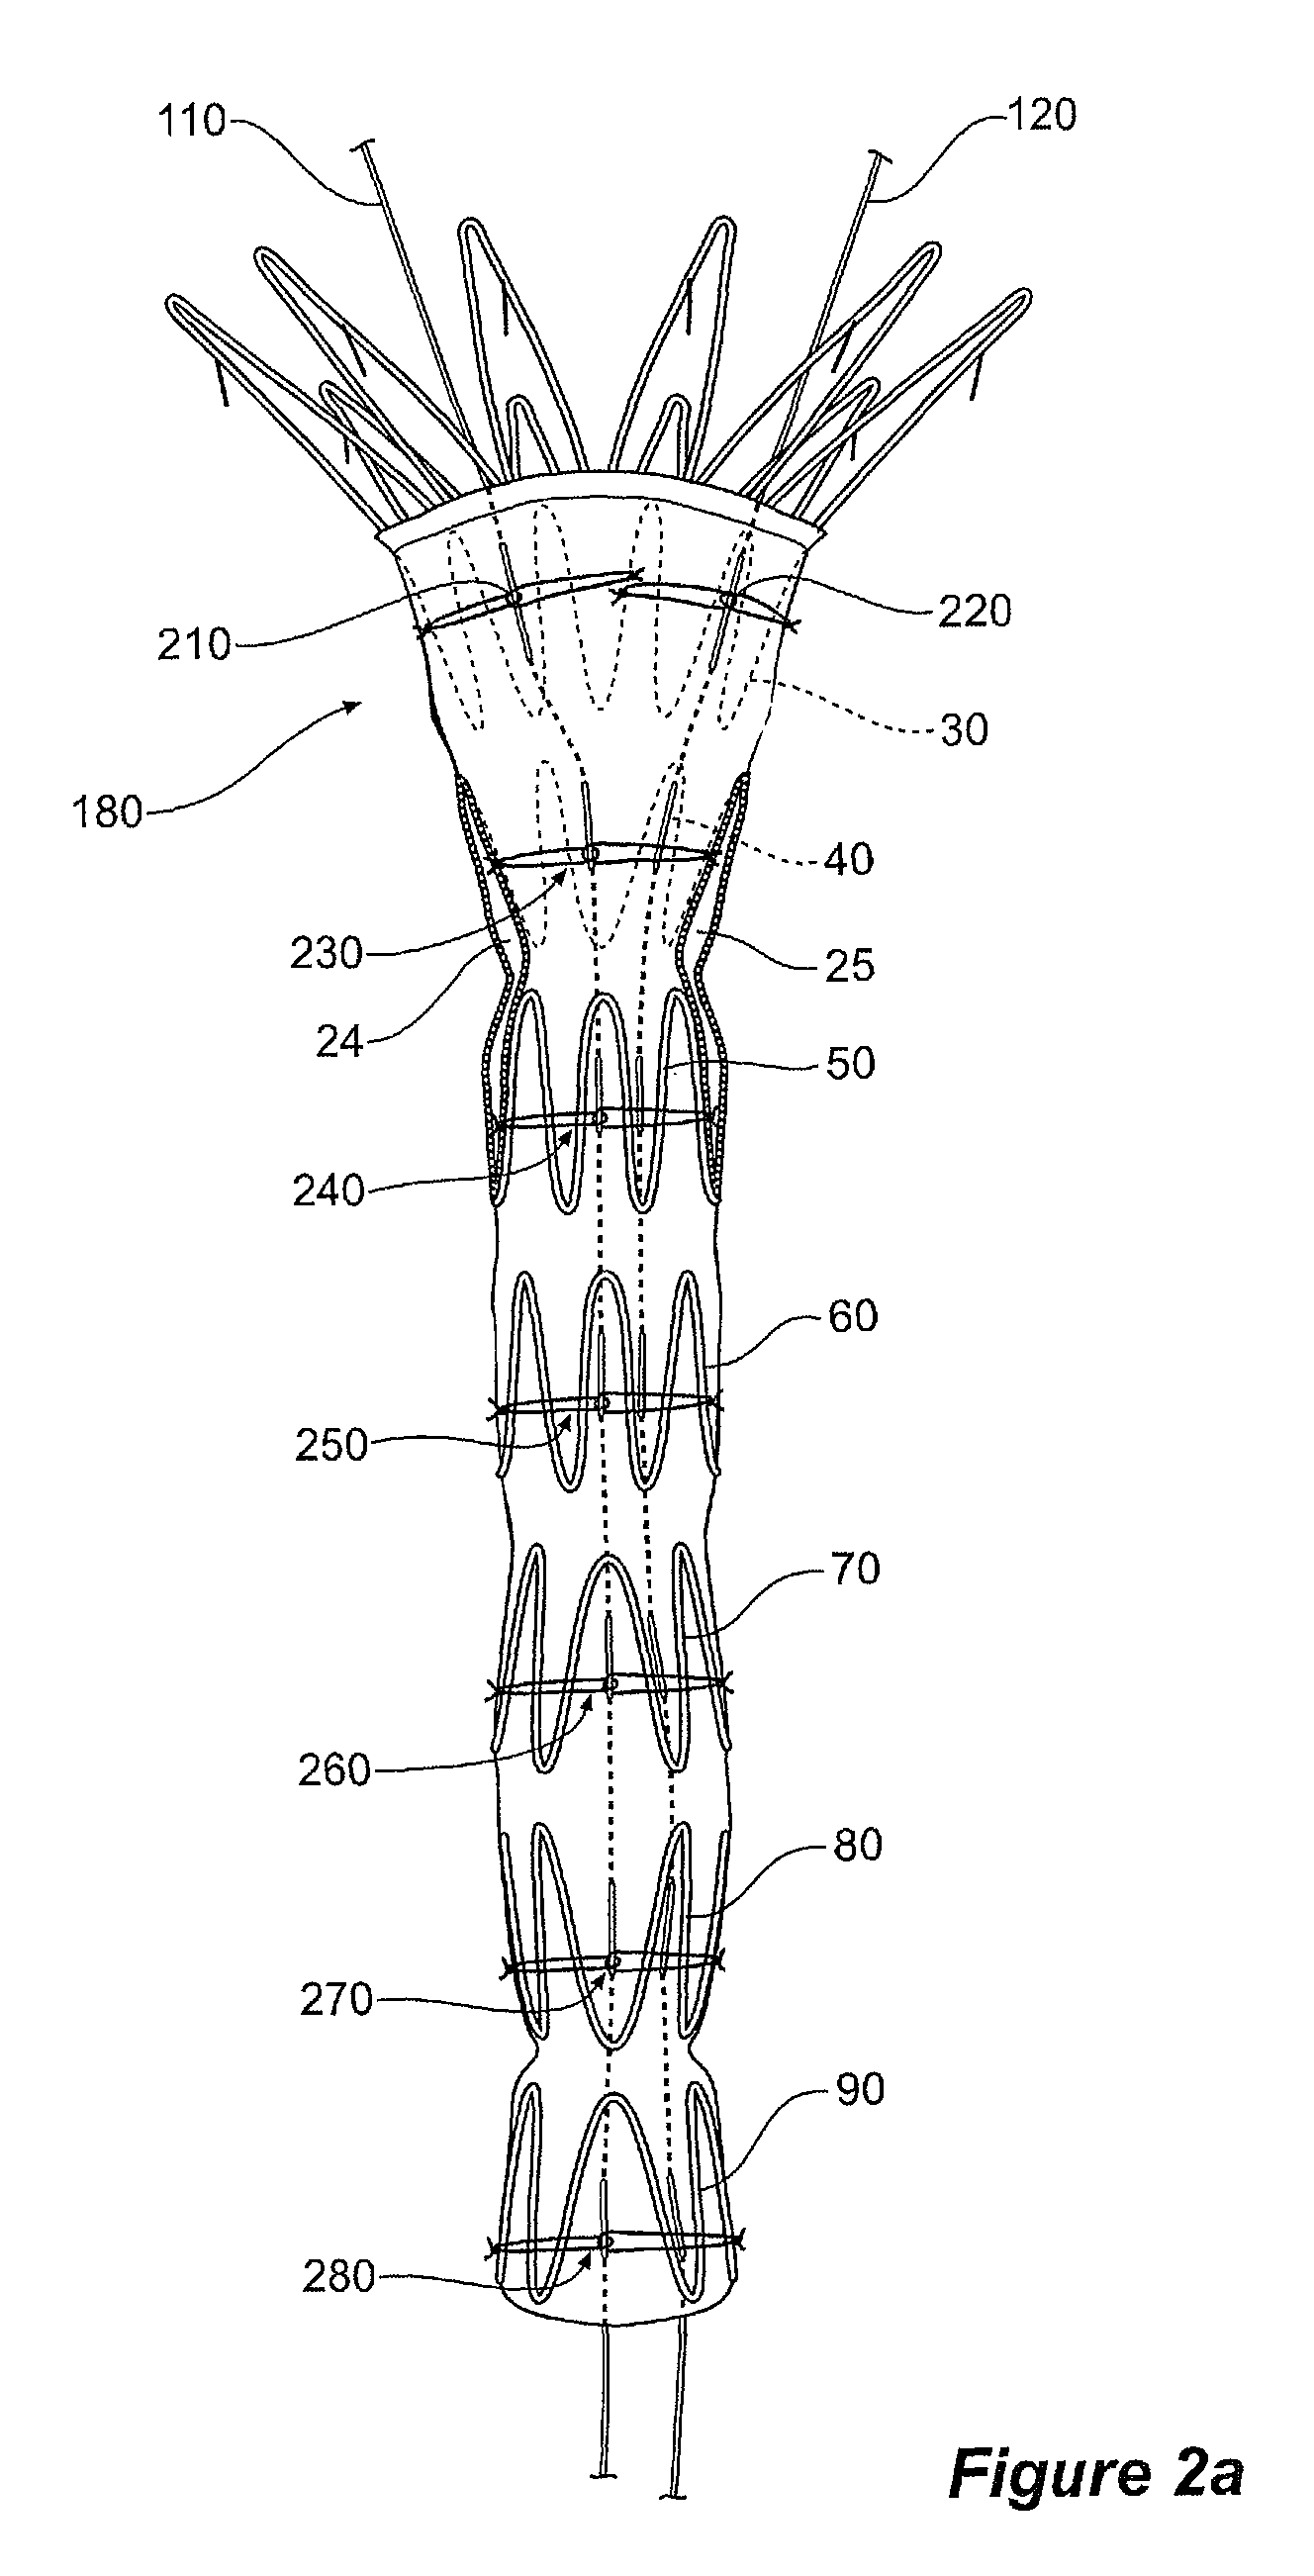 Assembly of stent grafts with diameter reducing ties